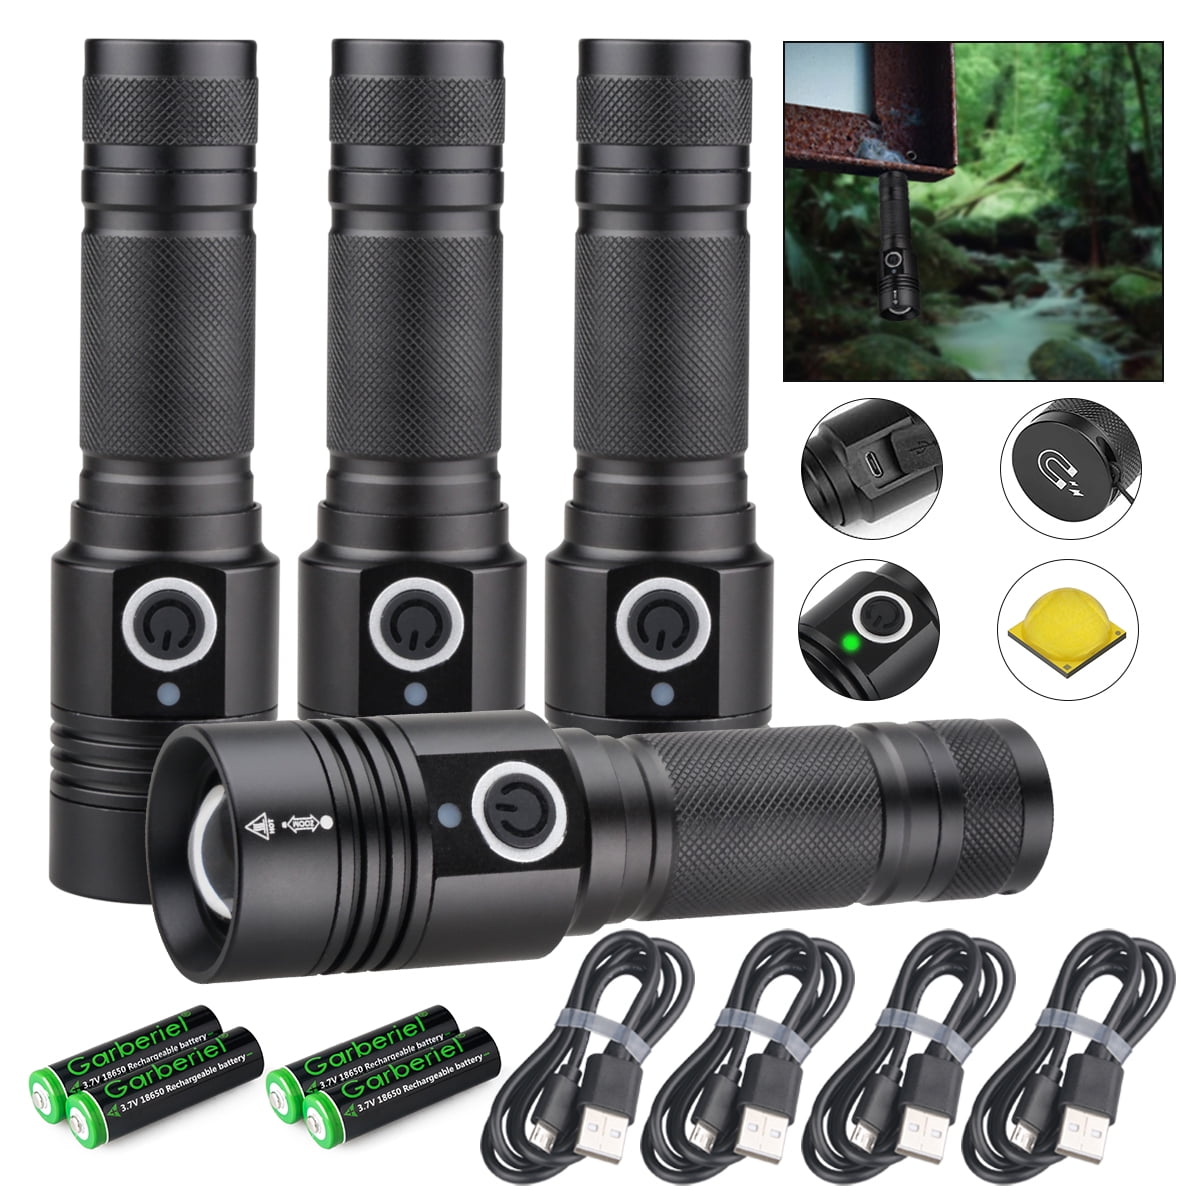 Flashlight Bright XHP50.2 LED Torch USB Rechargeable Zoomable LED Light Outd ST 